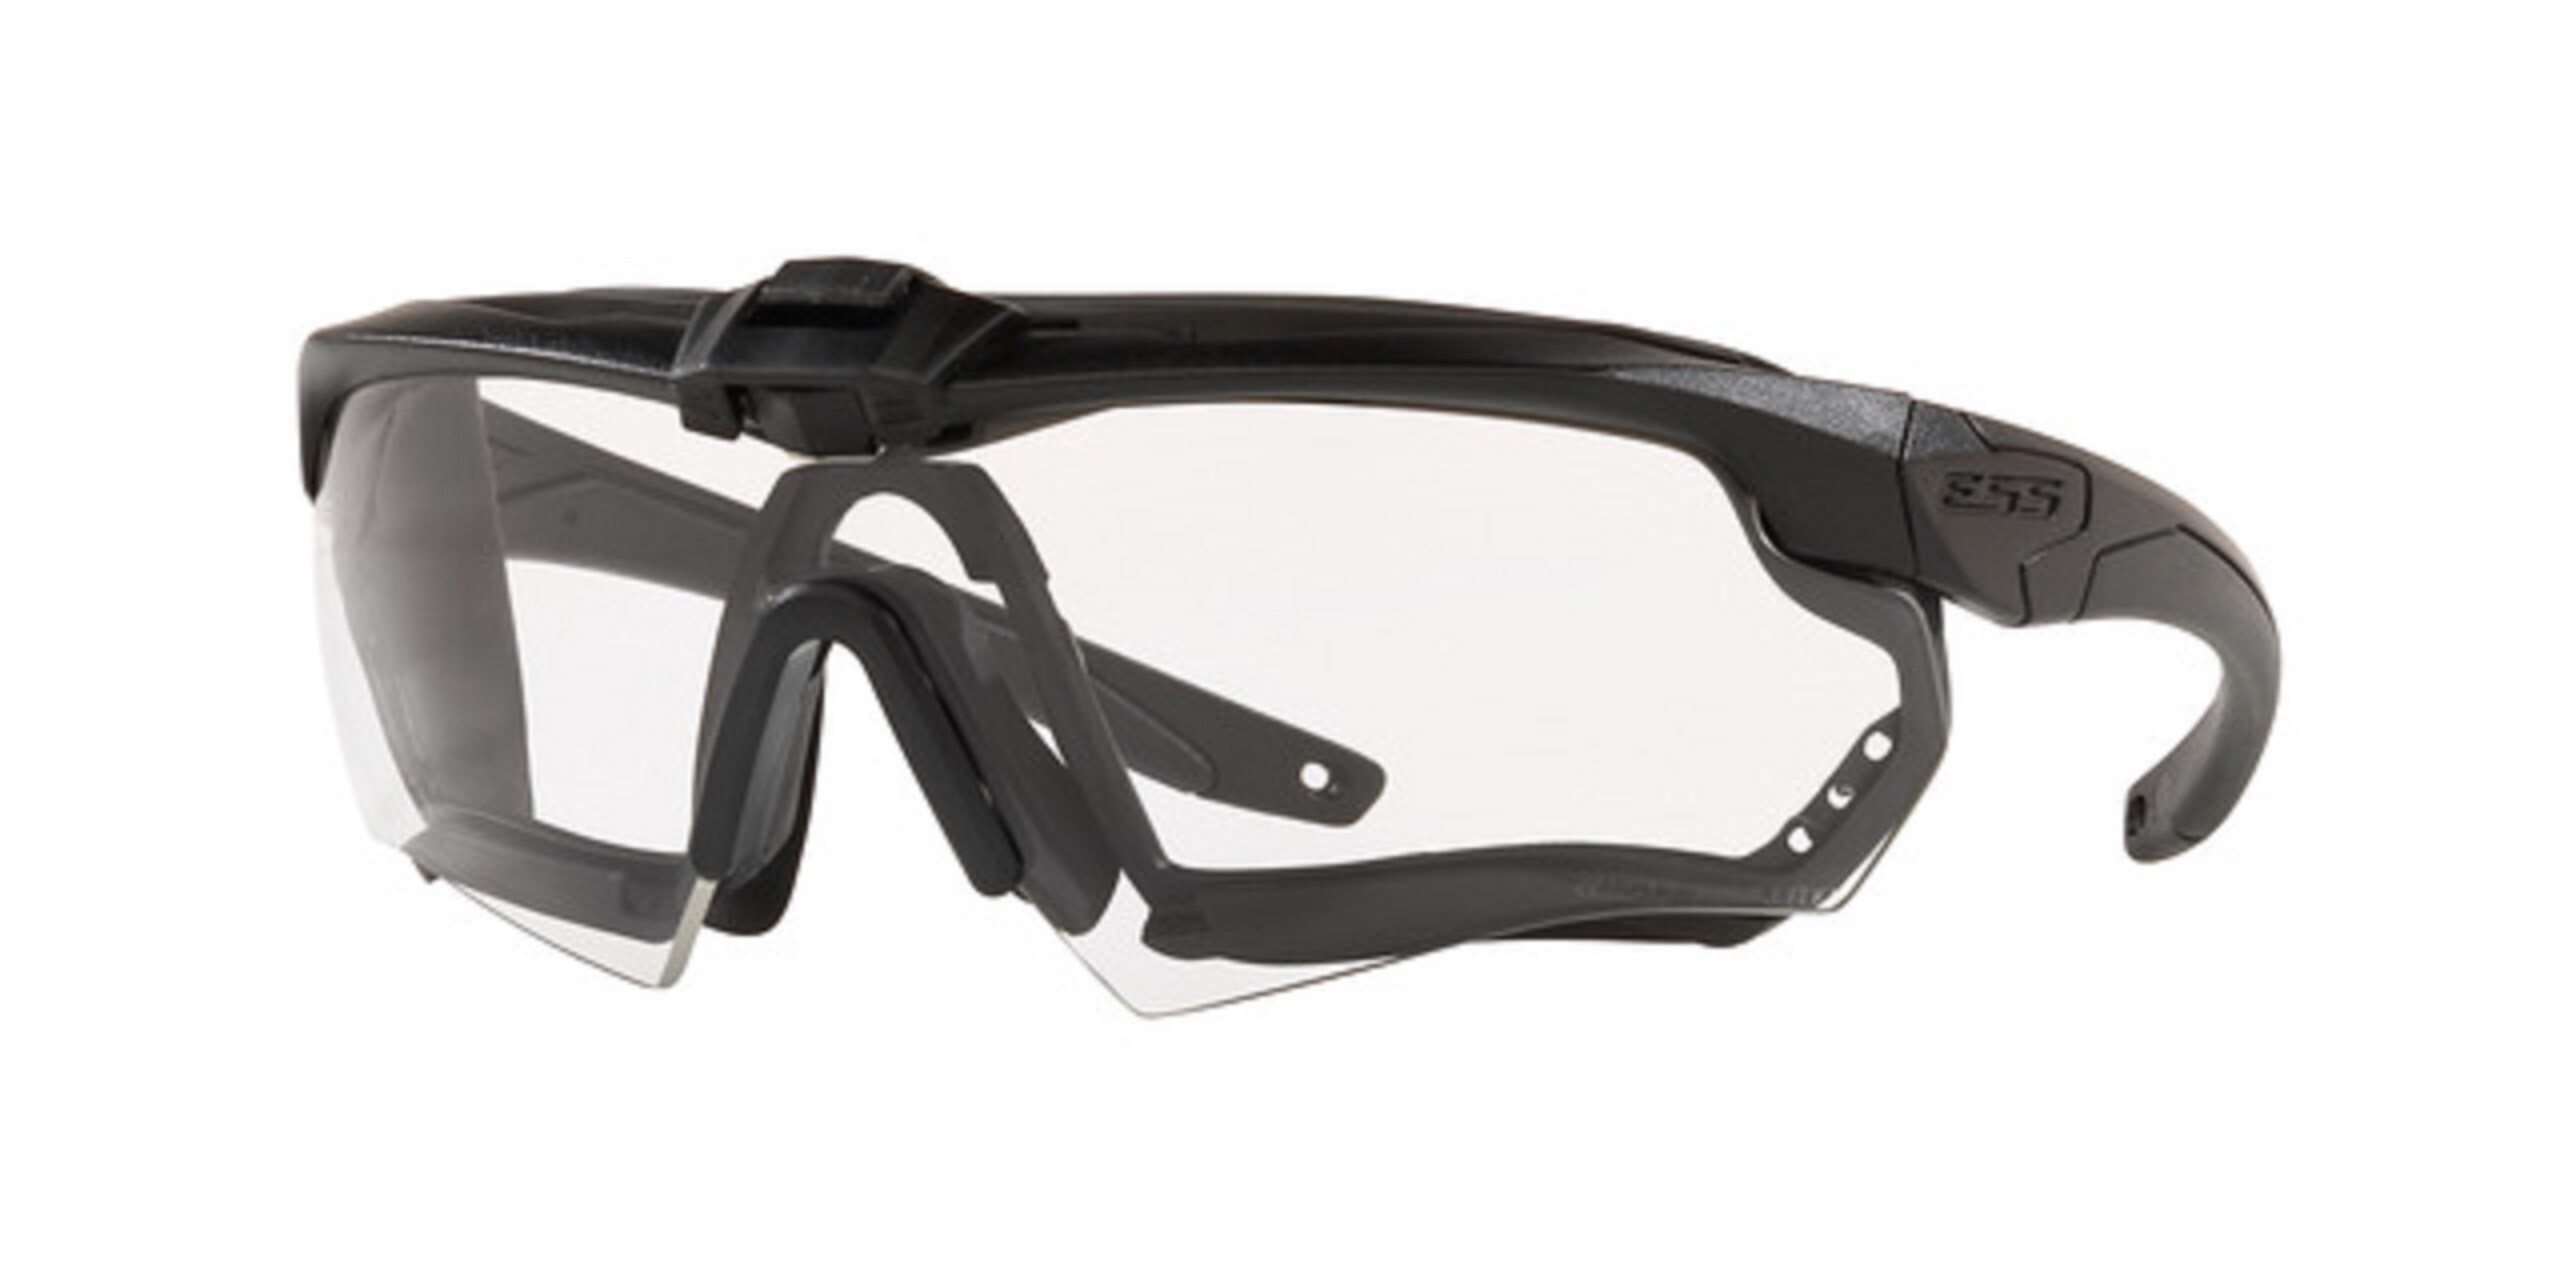 Oakley ESS Plastic Safety Glasses in the Eye Protection at Lowes.com